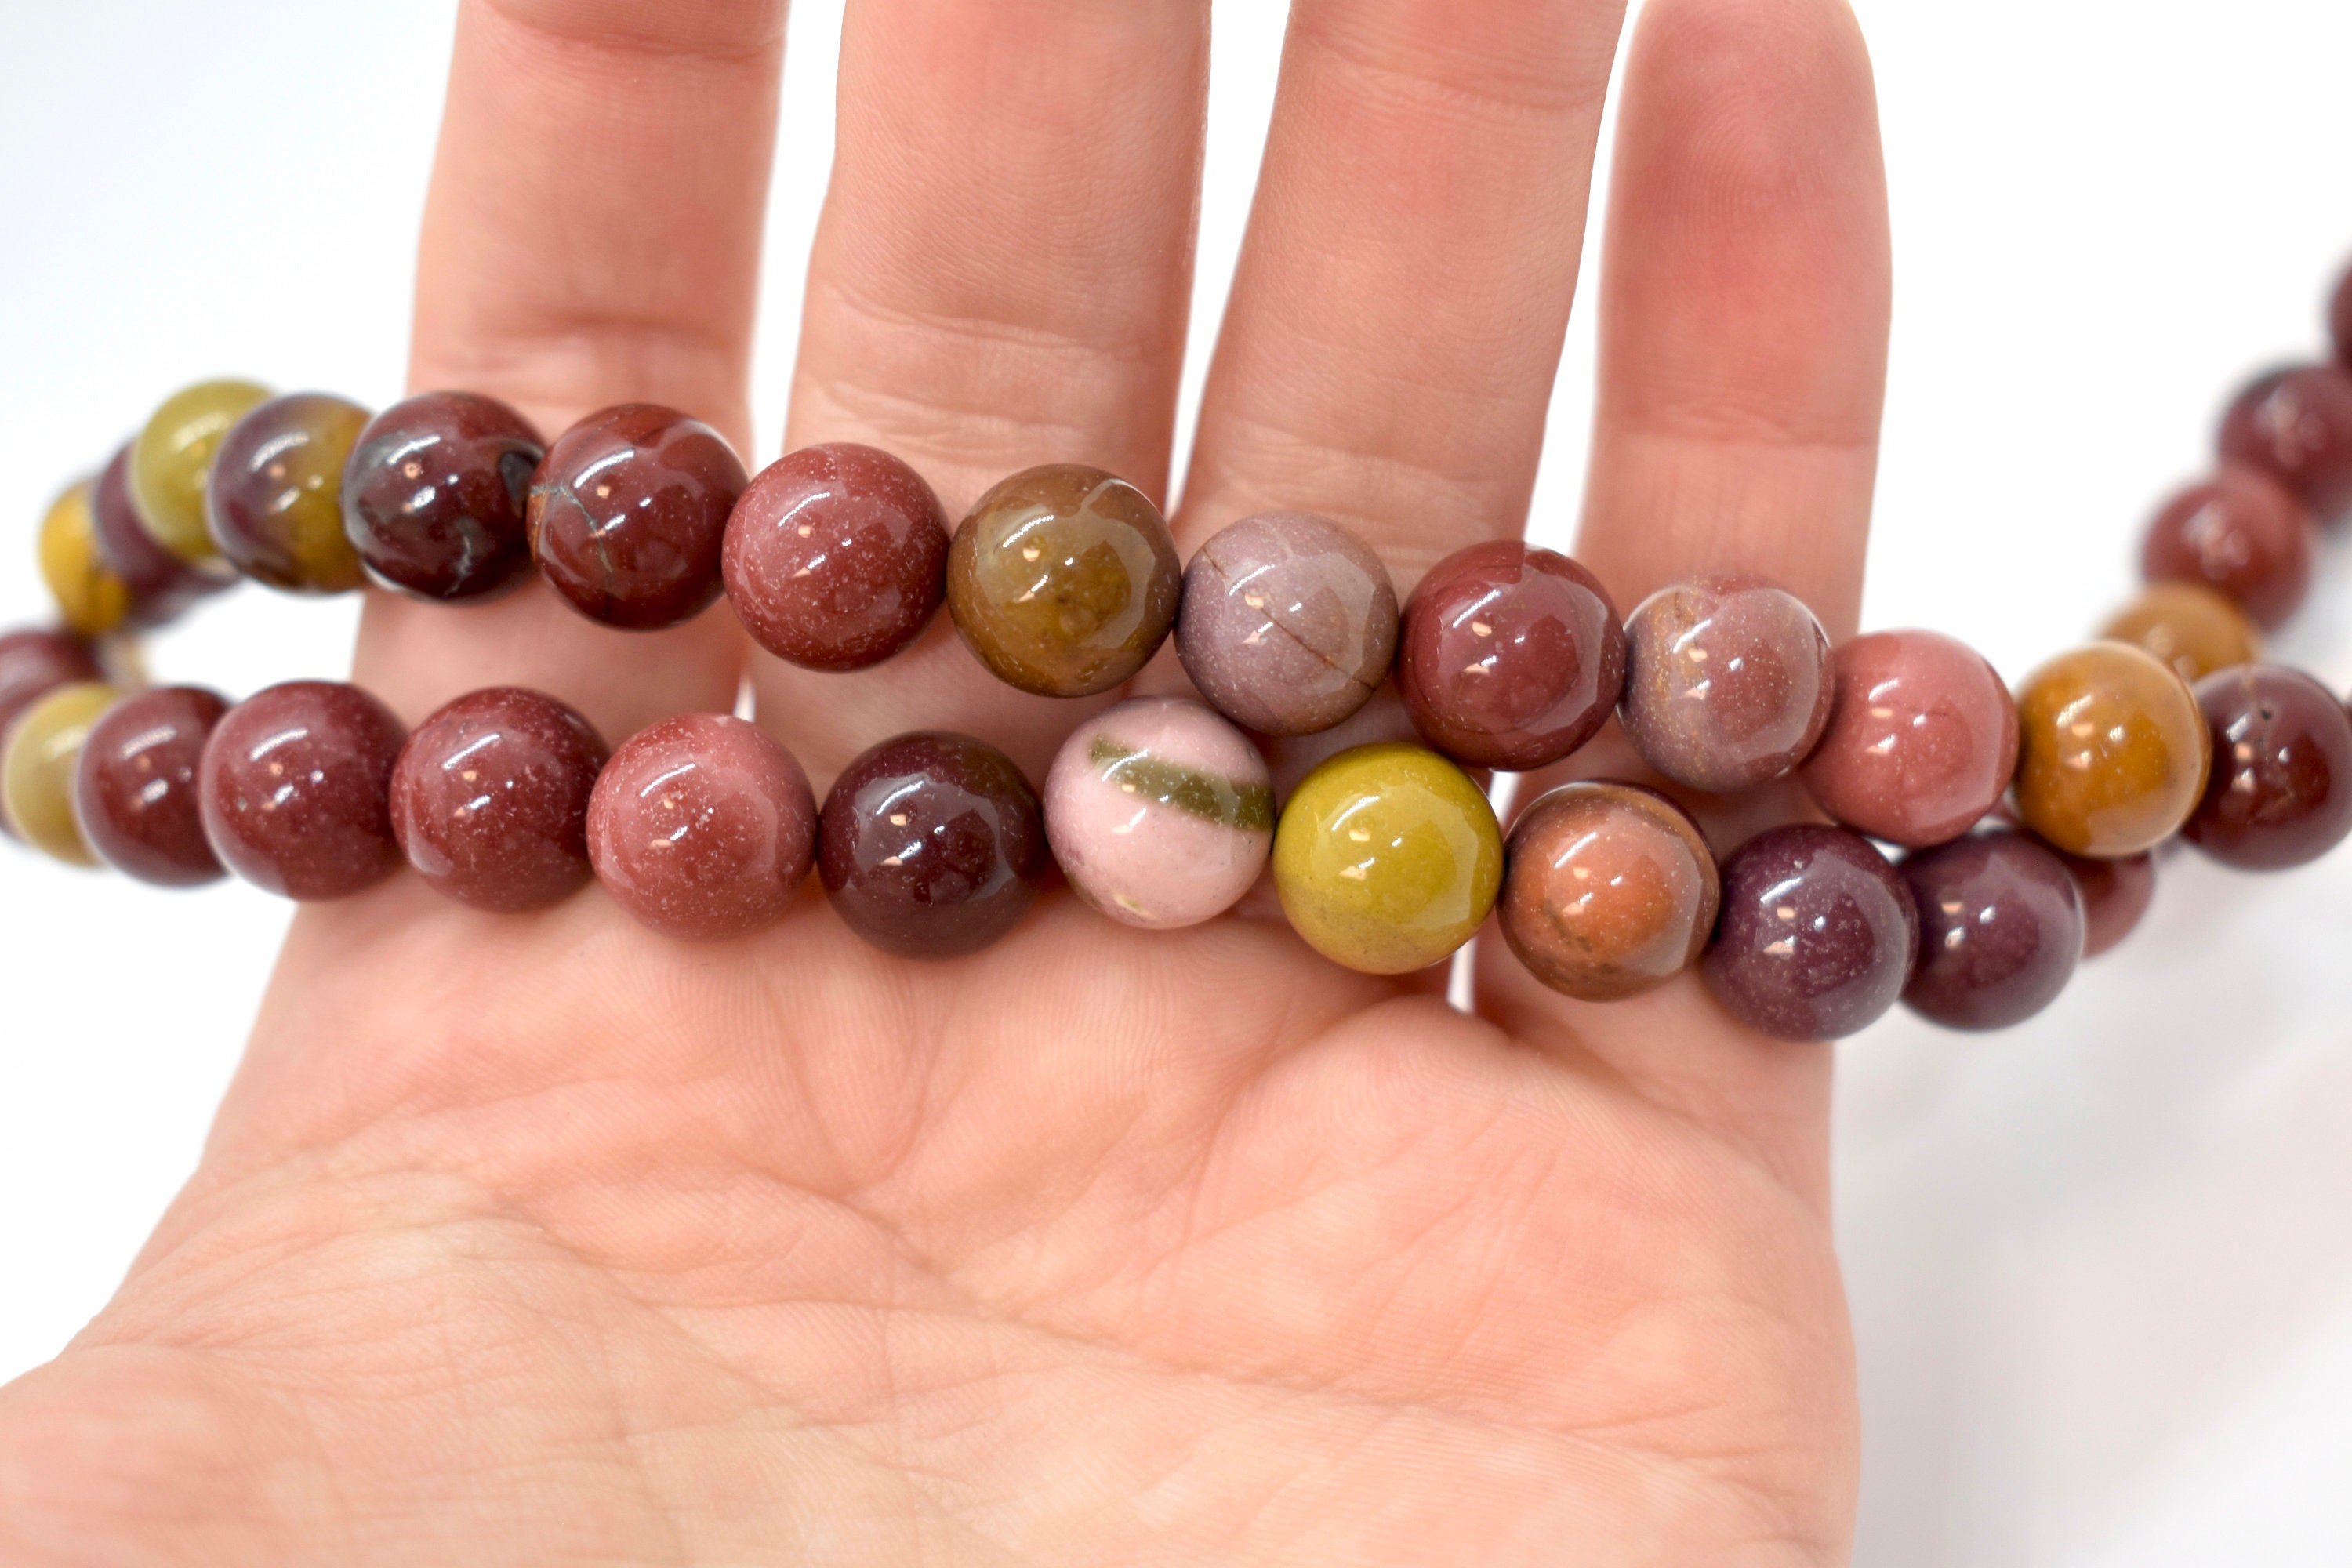 4,6,8,10,12mm Wholesale Natural Genuine Stone Gemstone Round Spacer Loose Beads 